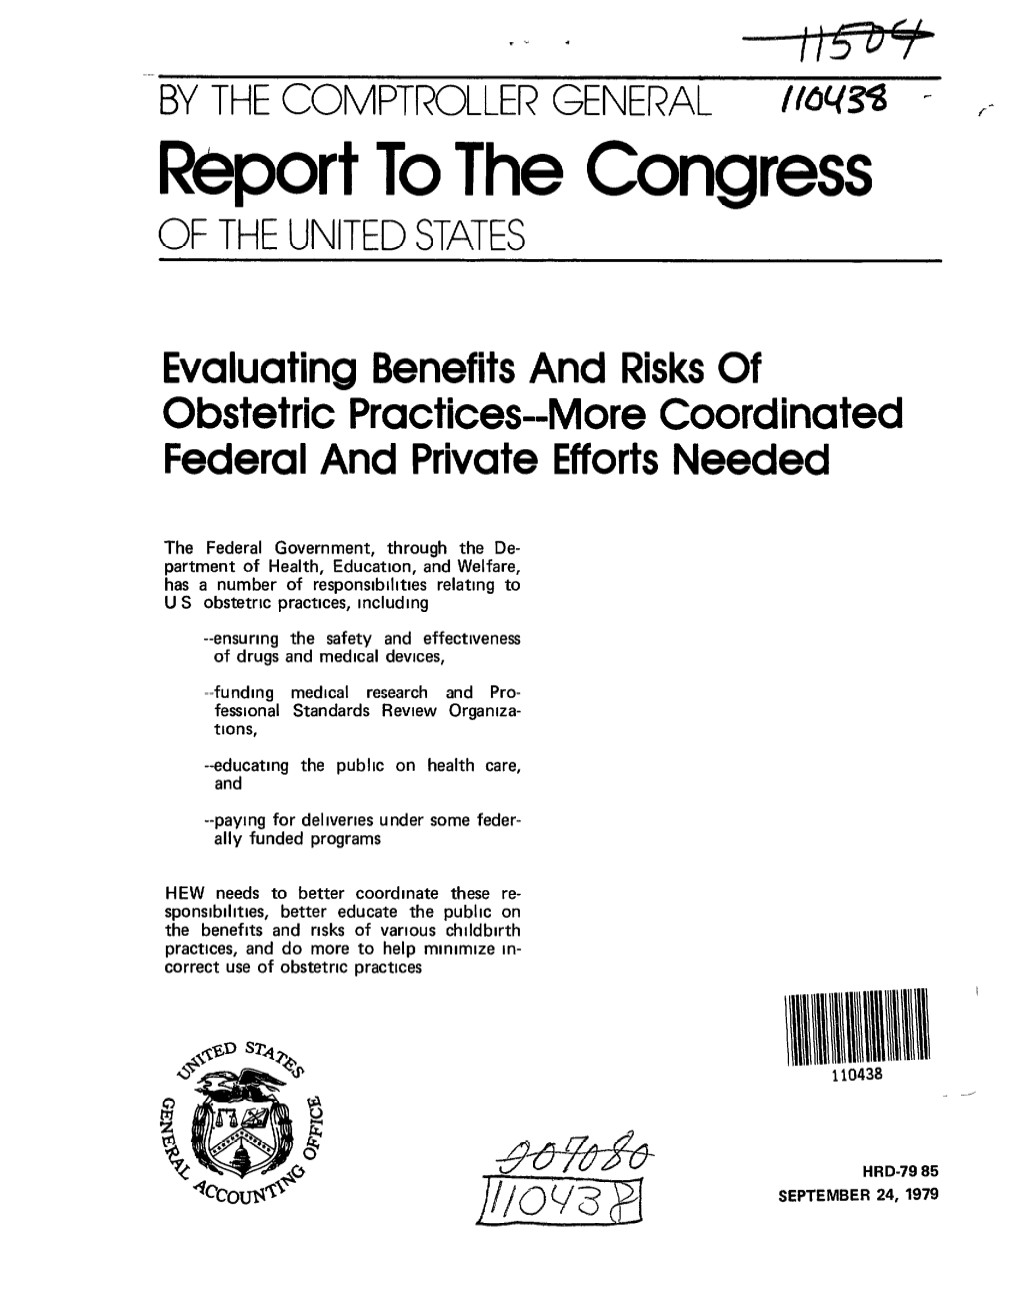 HRD-79-85 Evaluating Benefits And